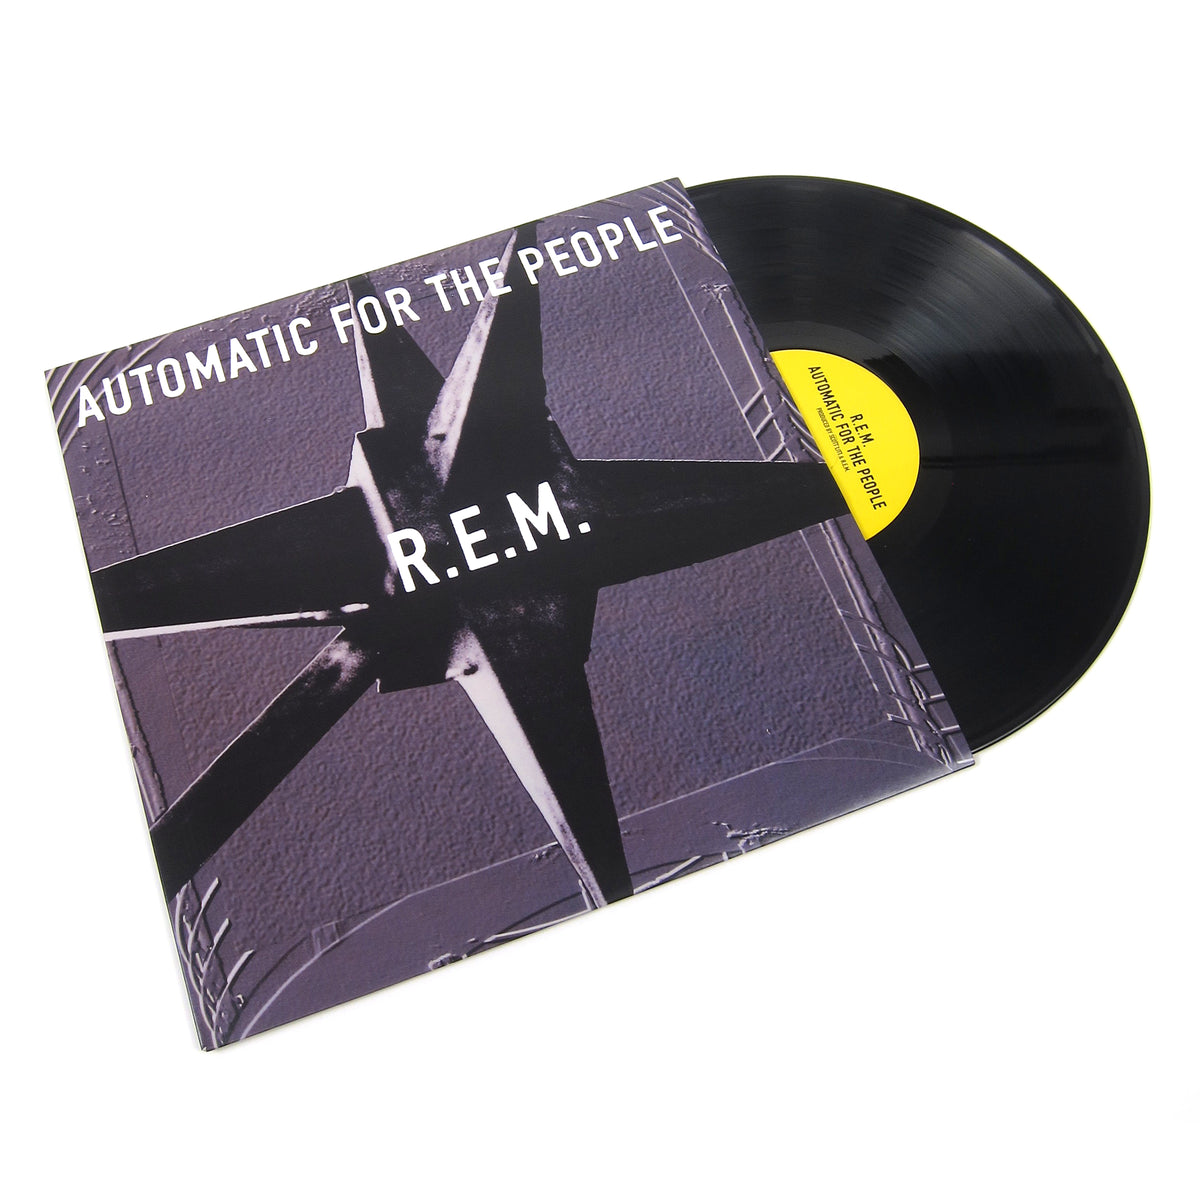 R.E.M.: Automatic For The People 25th Anniversary Edition —